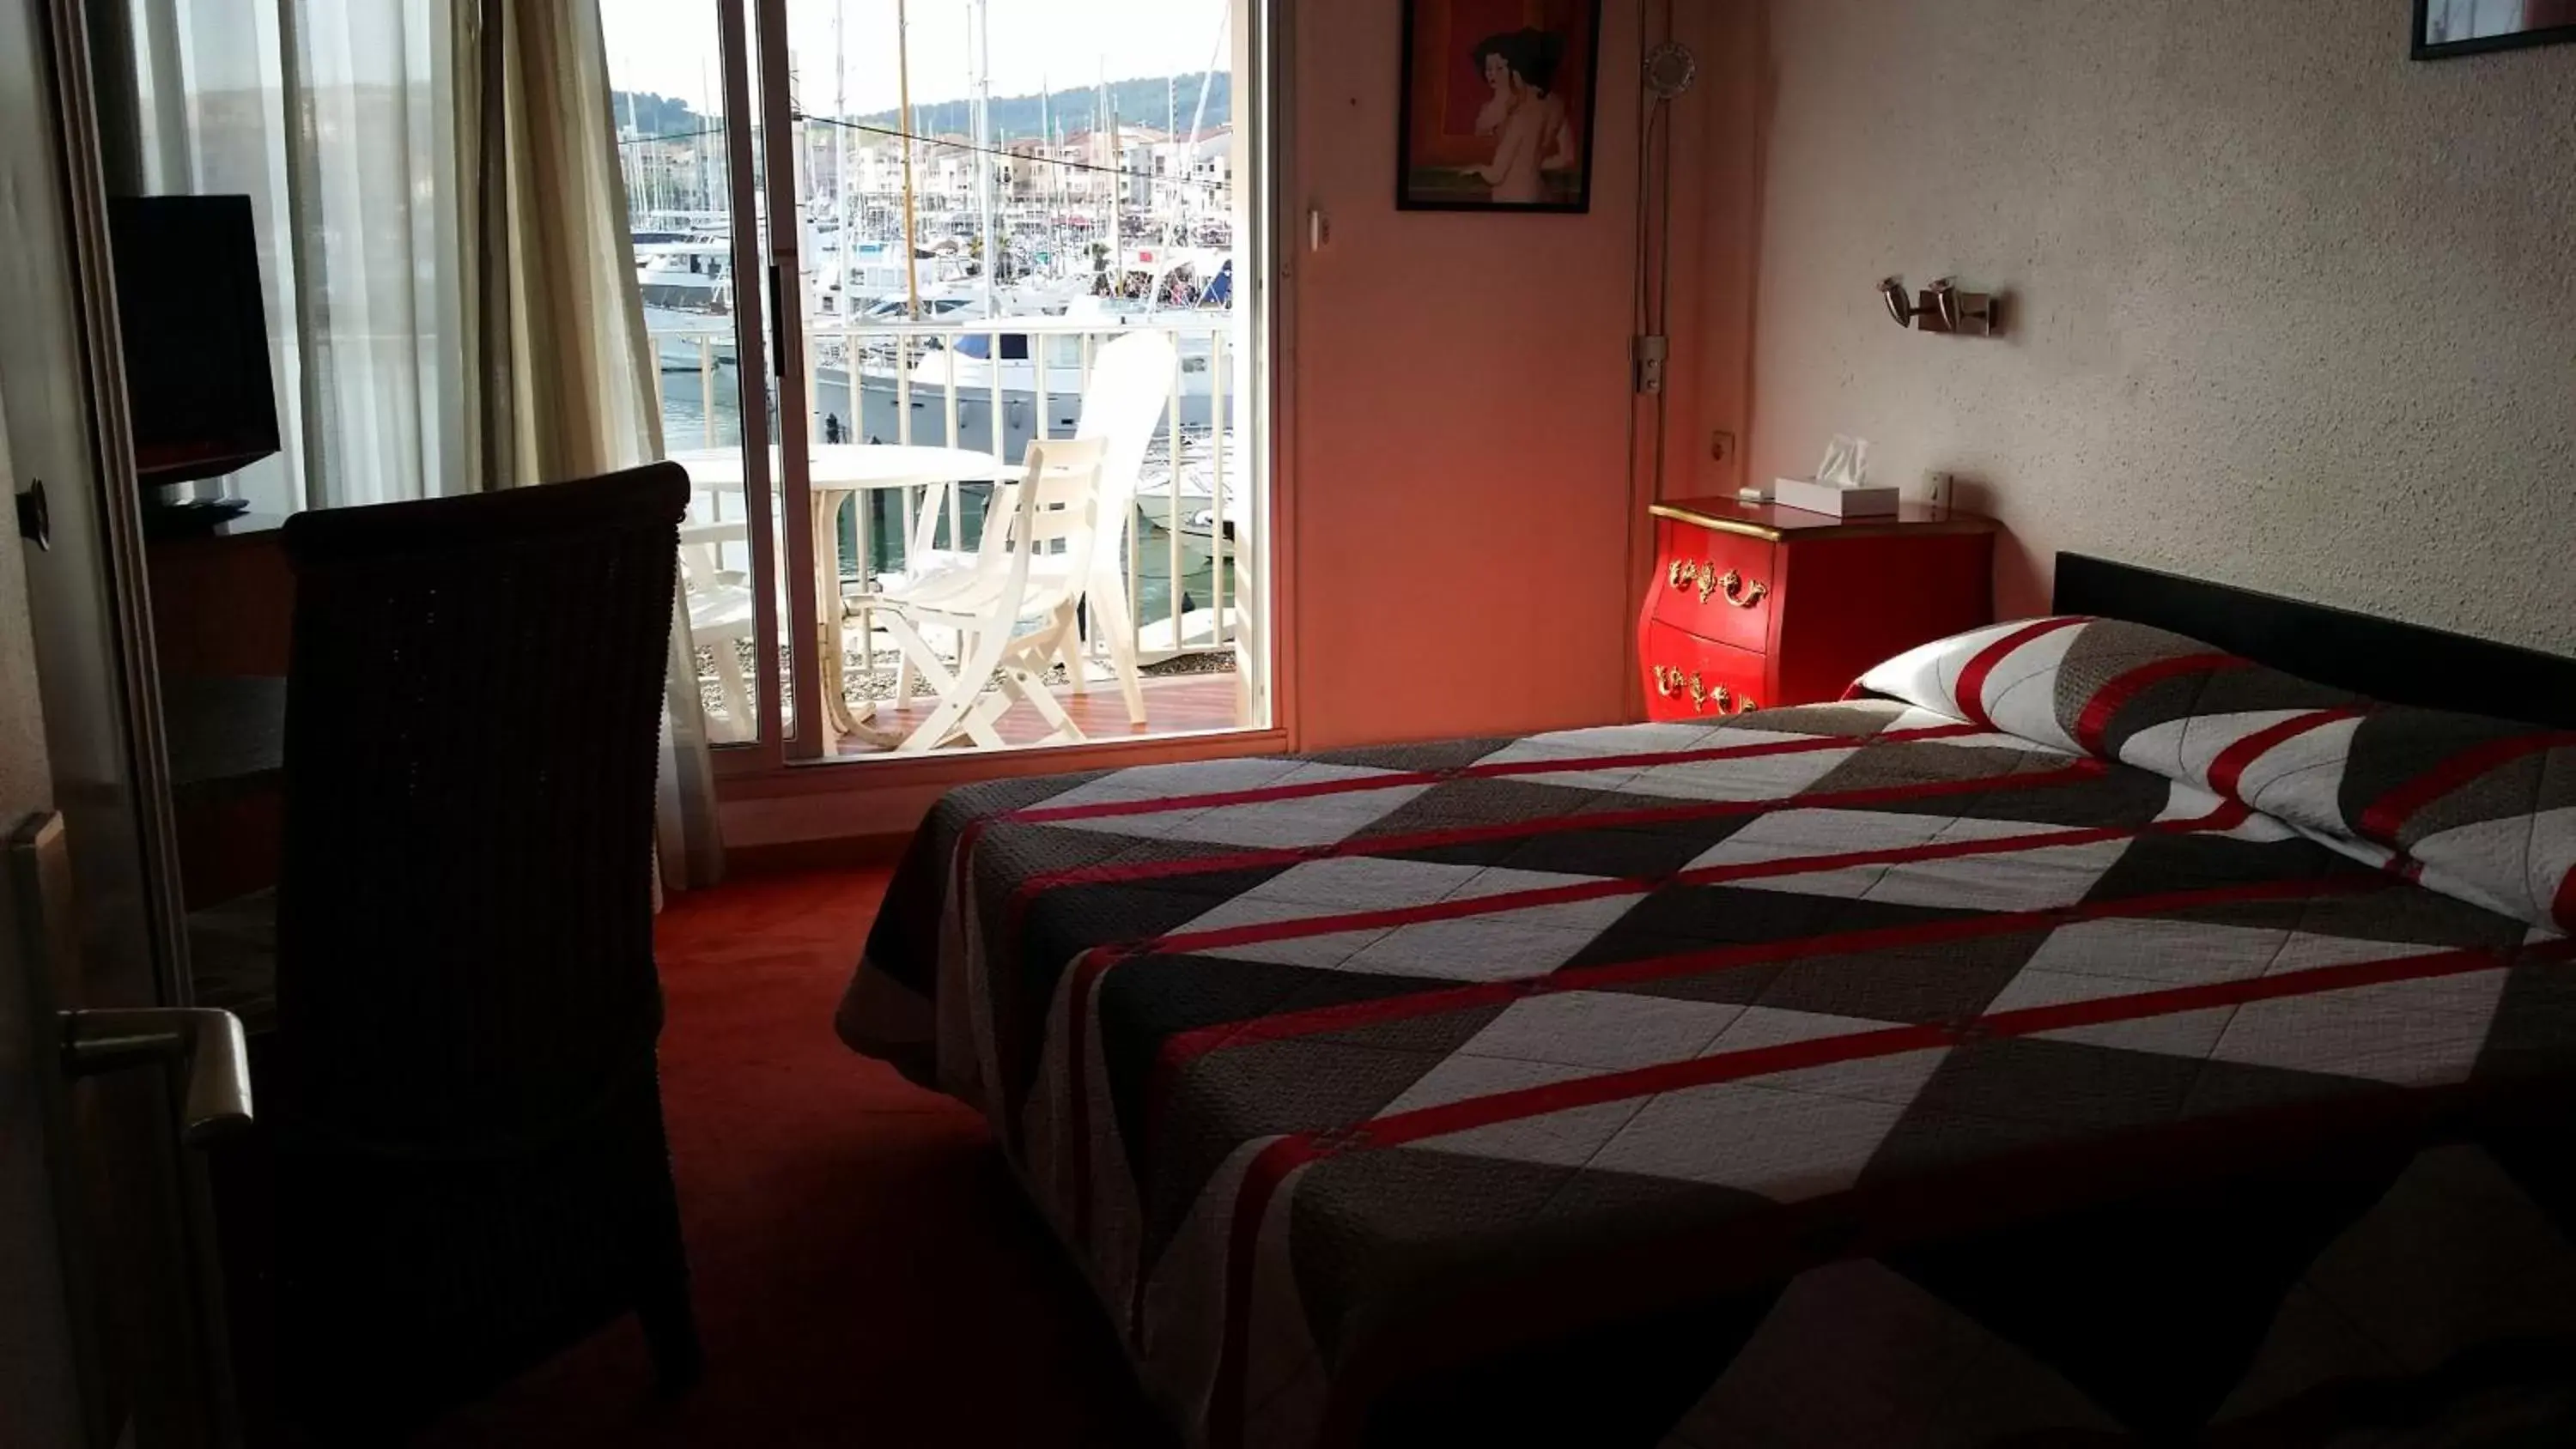 Bed, Room Photo in La Voile D' Or